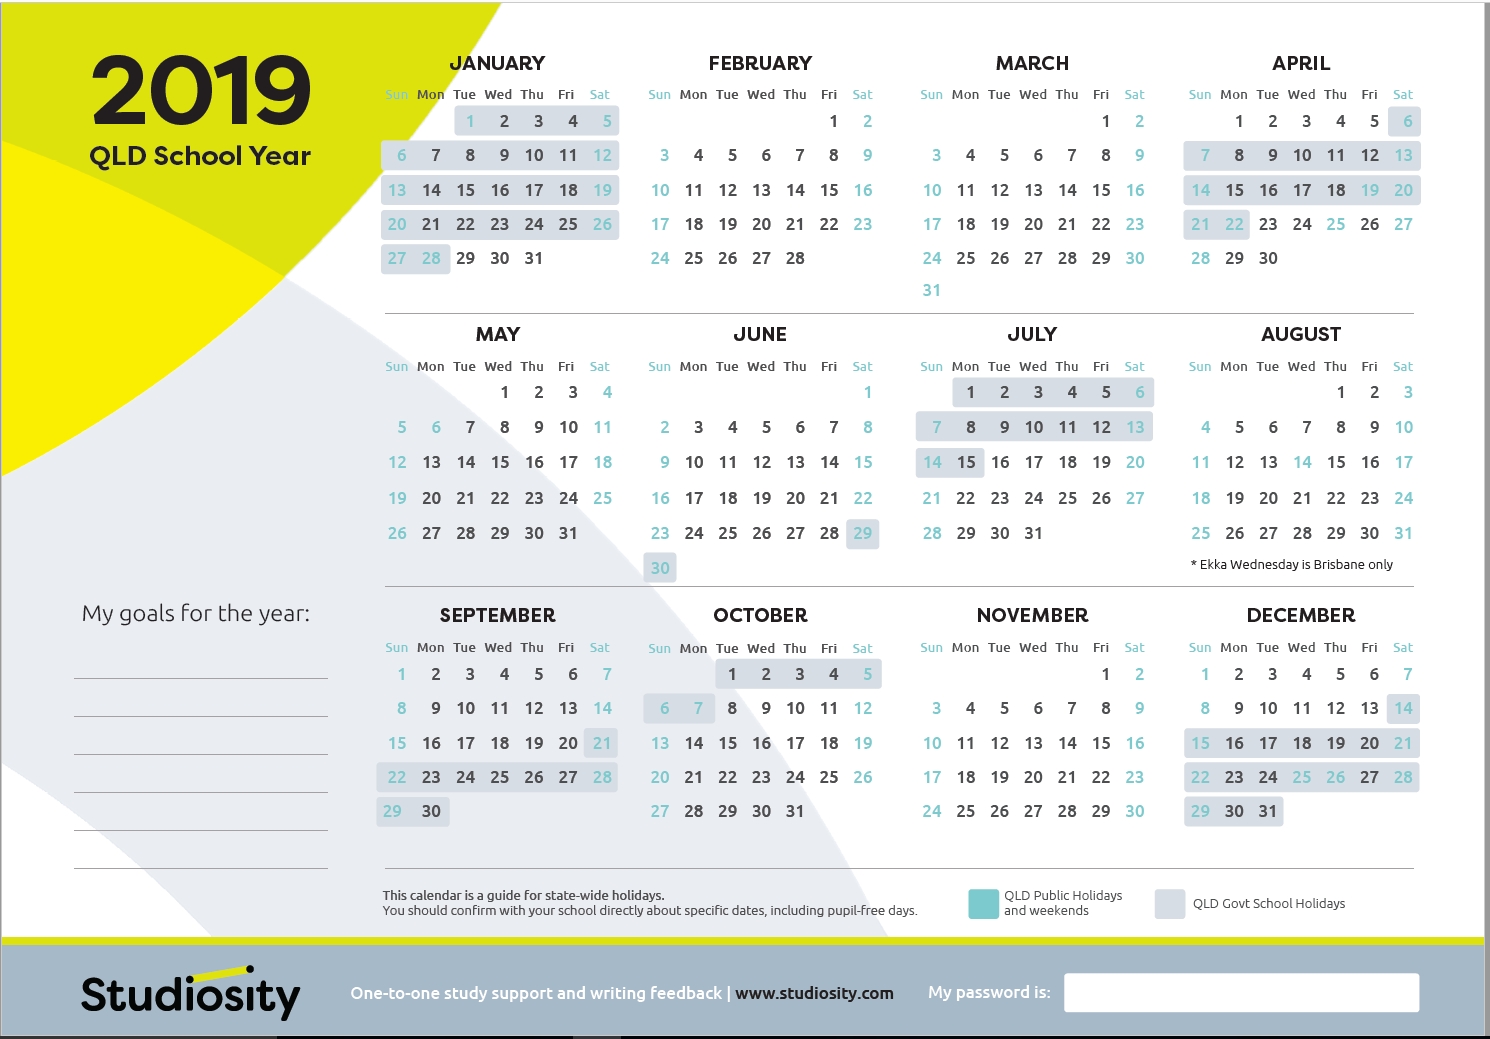 School Terms And Public Holiday Dates For Qld In 2019 | Studiosity Calendar Public Holidays Australia